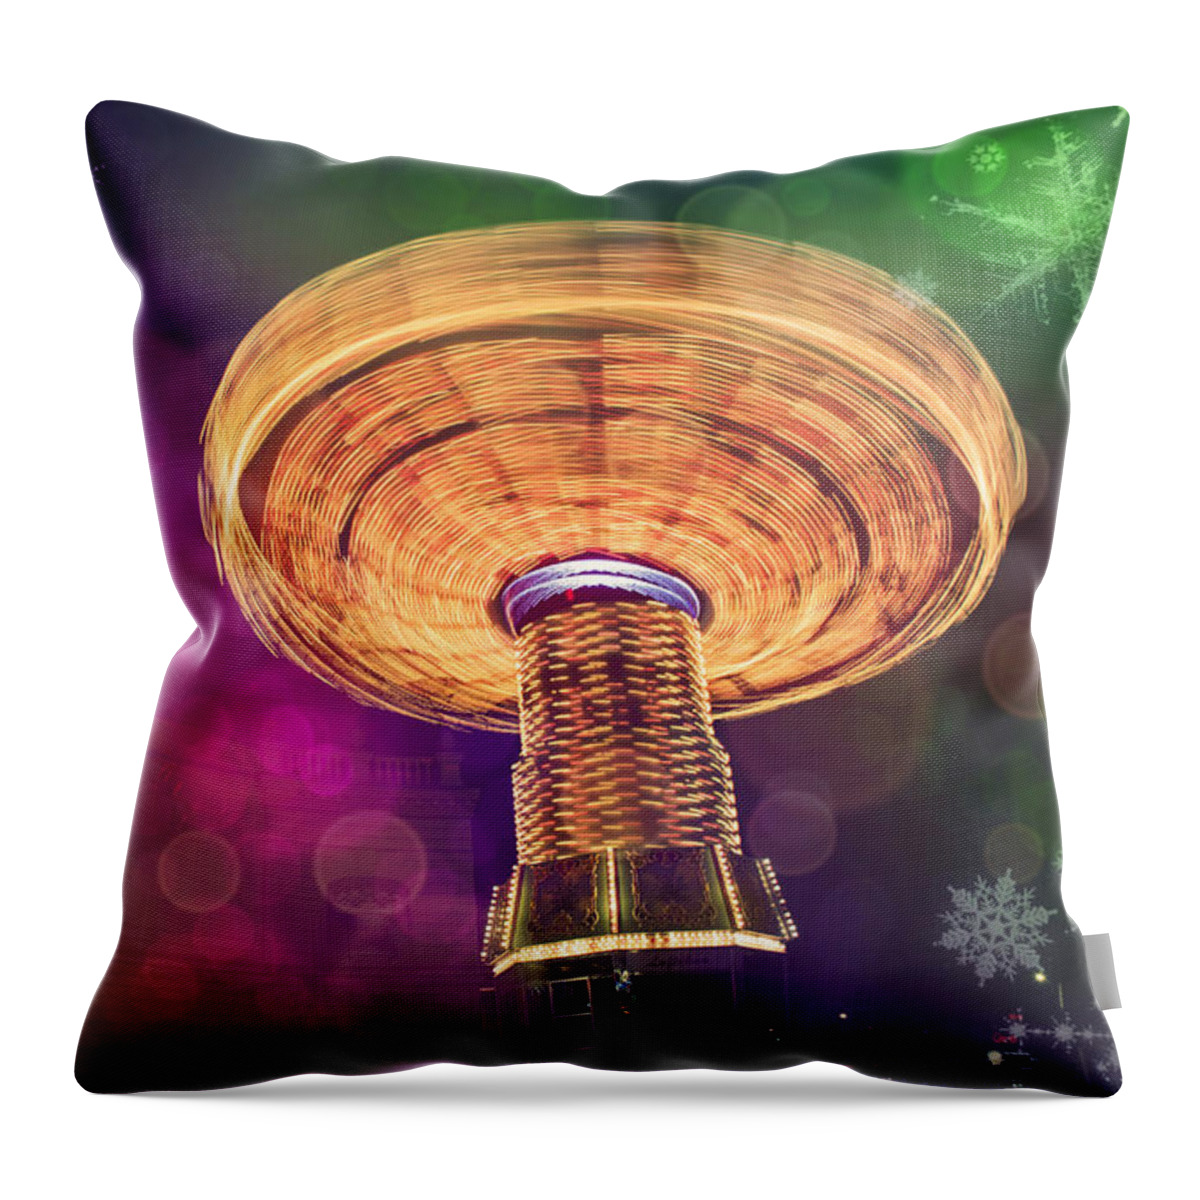 Prater Throw Pillow featuring the photograph A Light Spin by Carol Japp